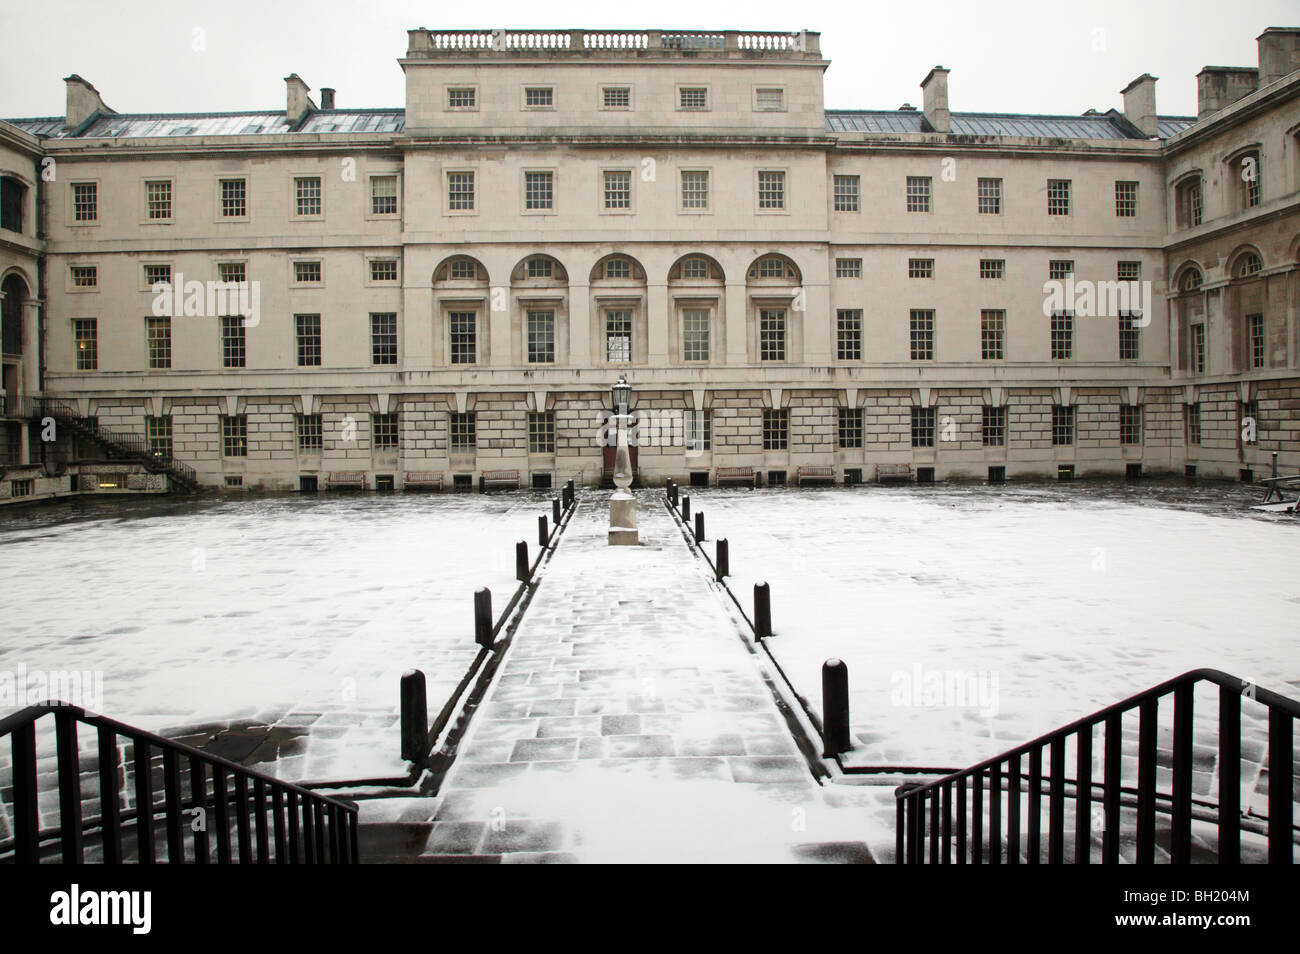 Snow-covered courtyard of the Queen Mary's Block, Royal Naval Hospital, Greenwich. Stock Photo